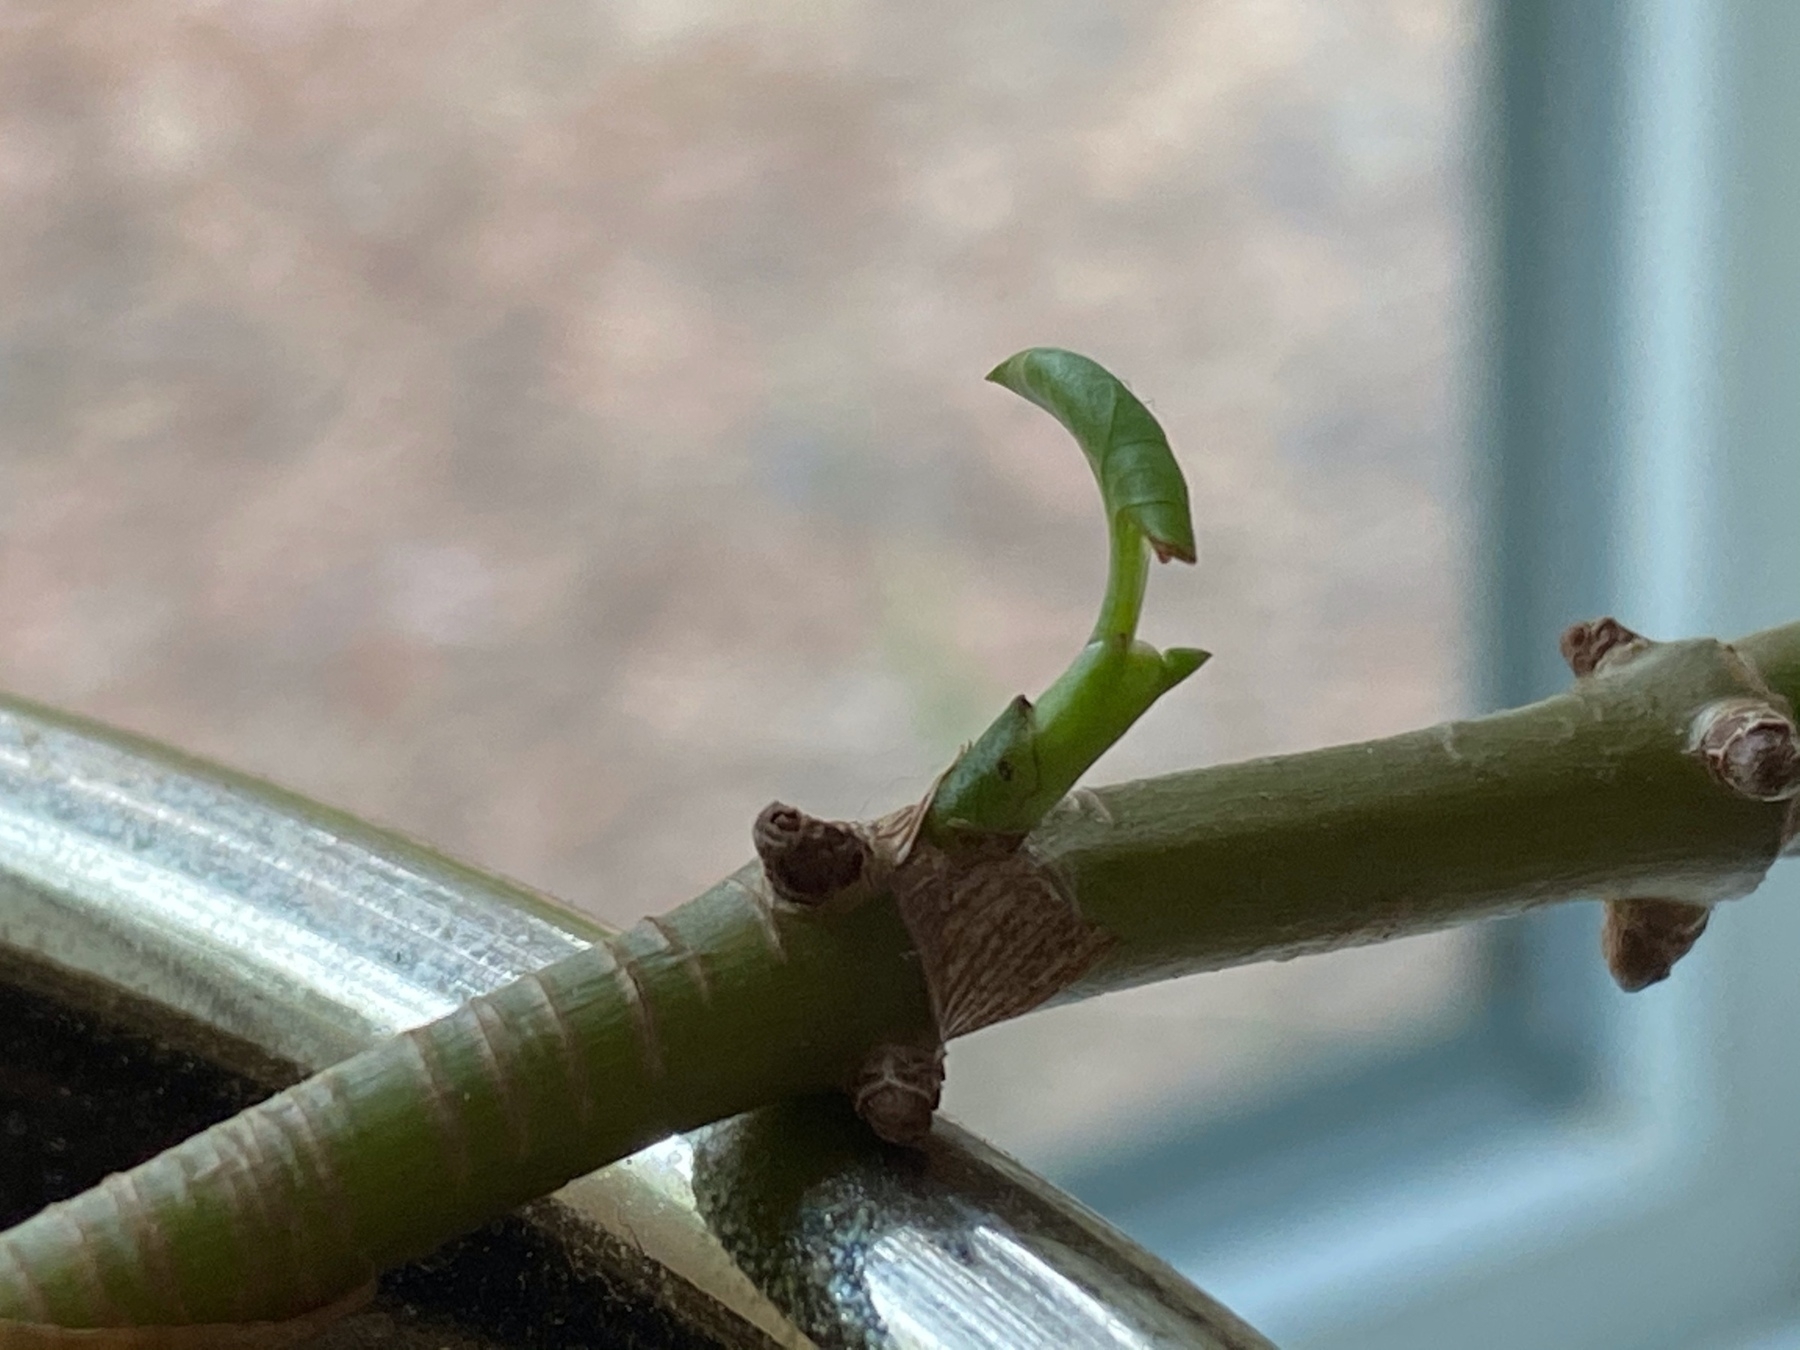 the same bud as above, but now uncurling a young leaf